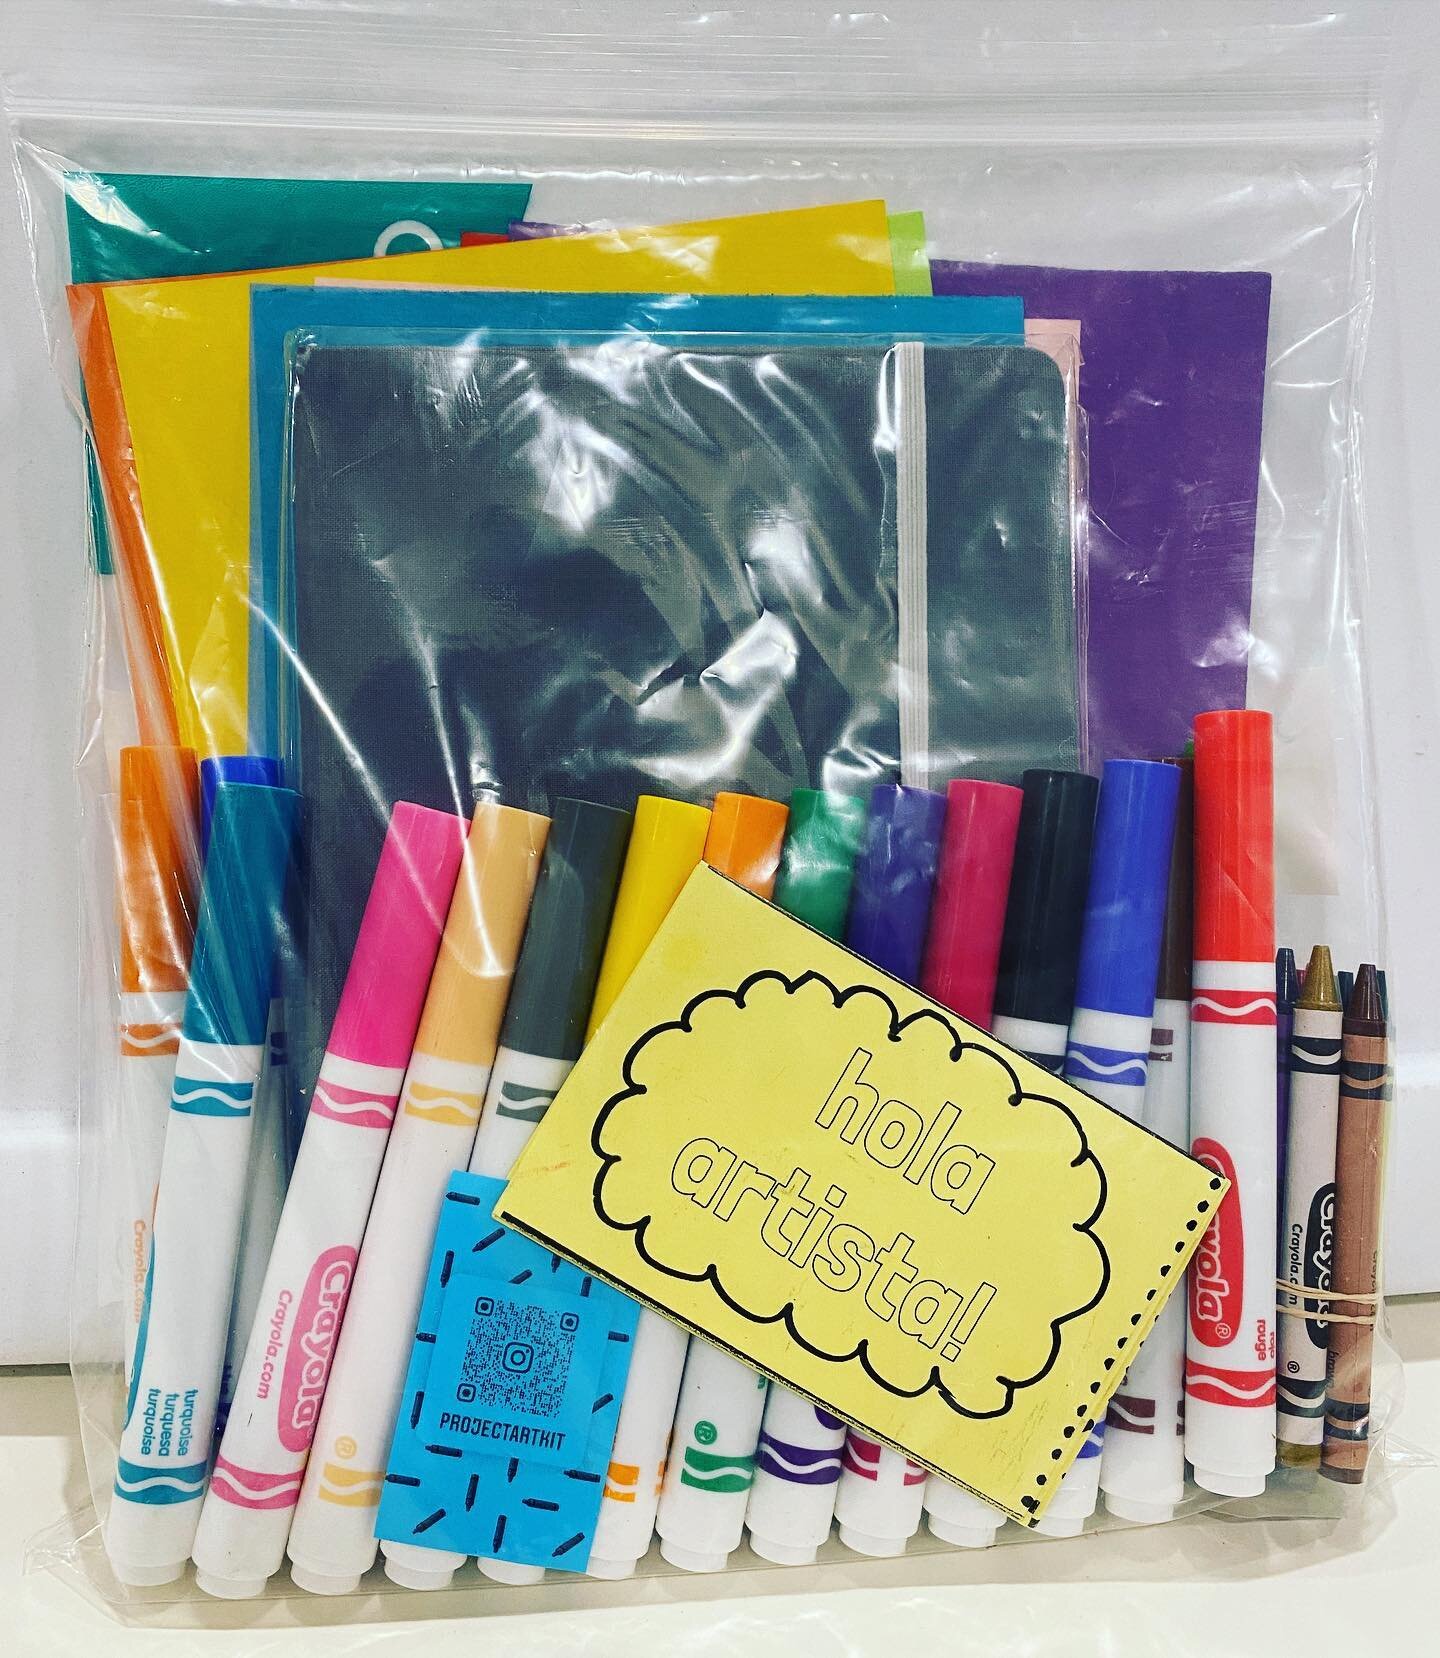 ❤️art🧡kits💛are💚free💙because💜art🖤is🤎essential💖